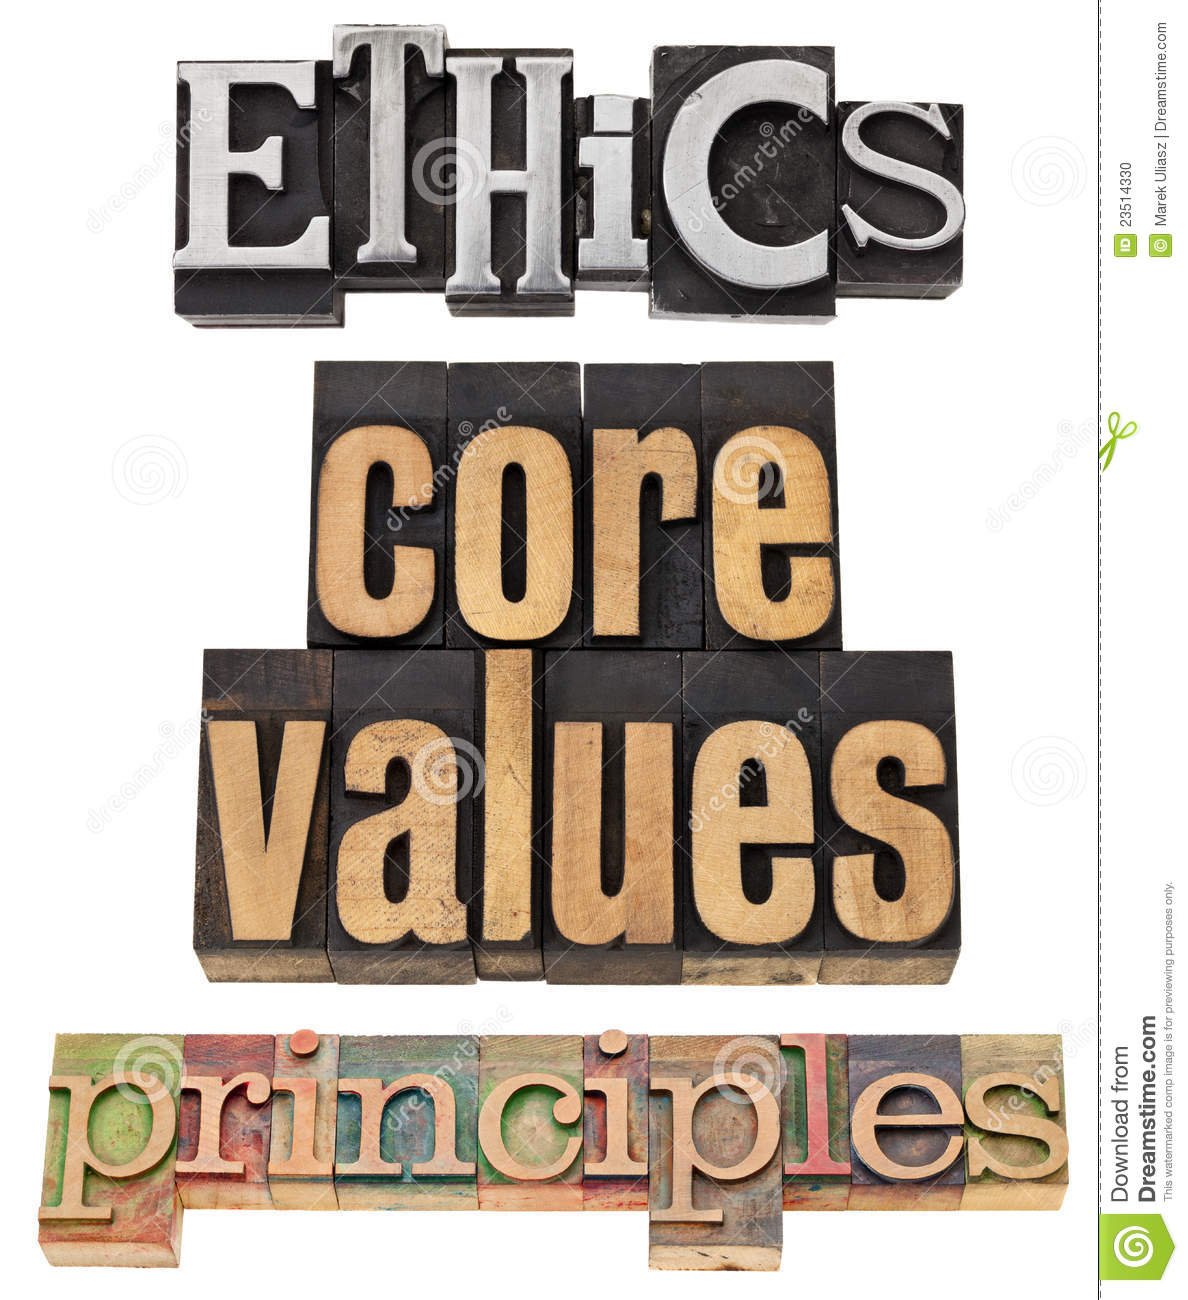 Ethics Core Values Principles   A Collage Of Isolated Words In